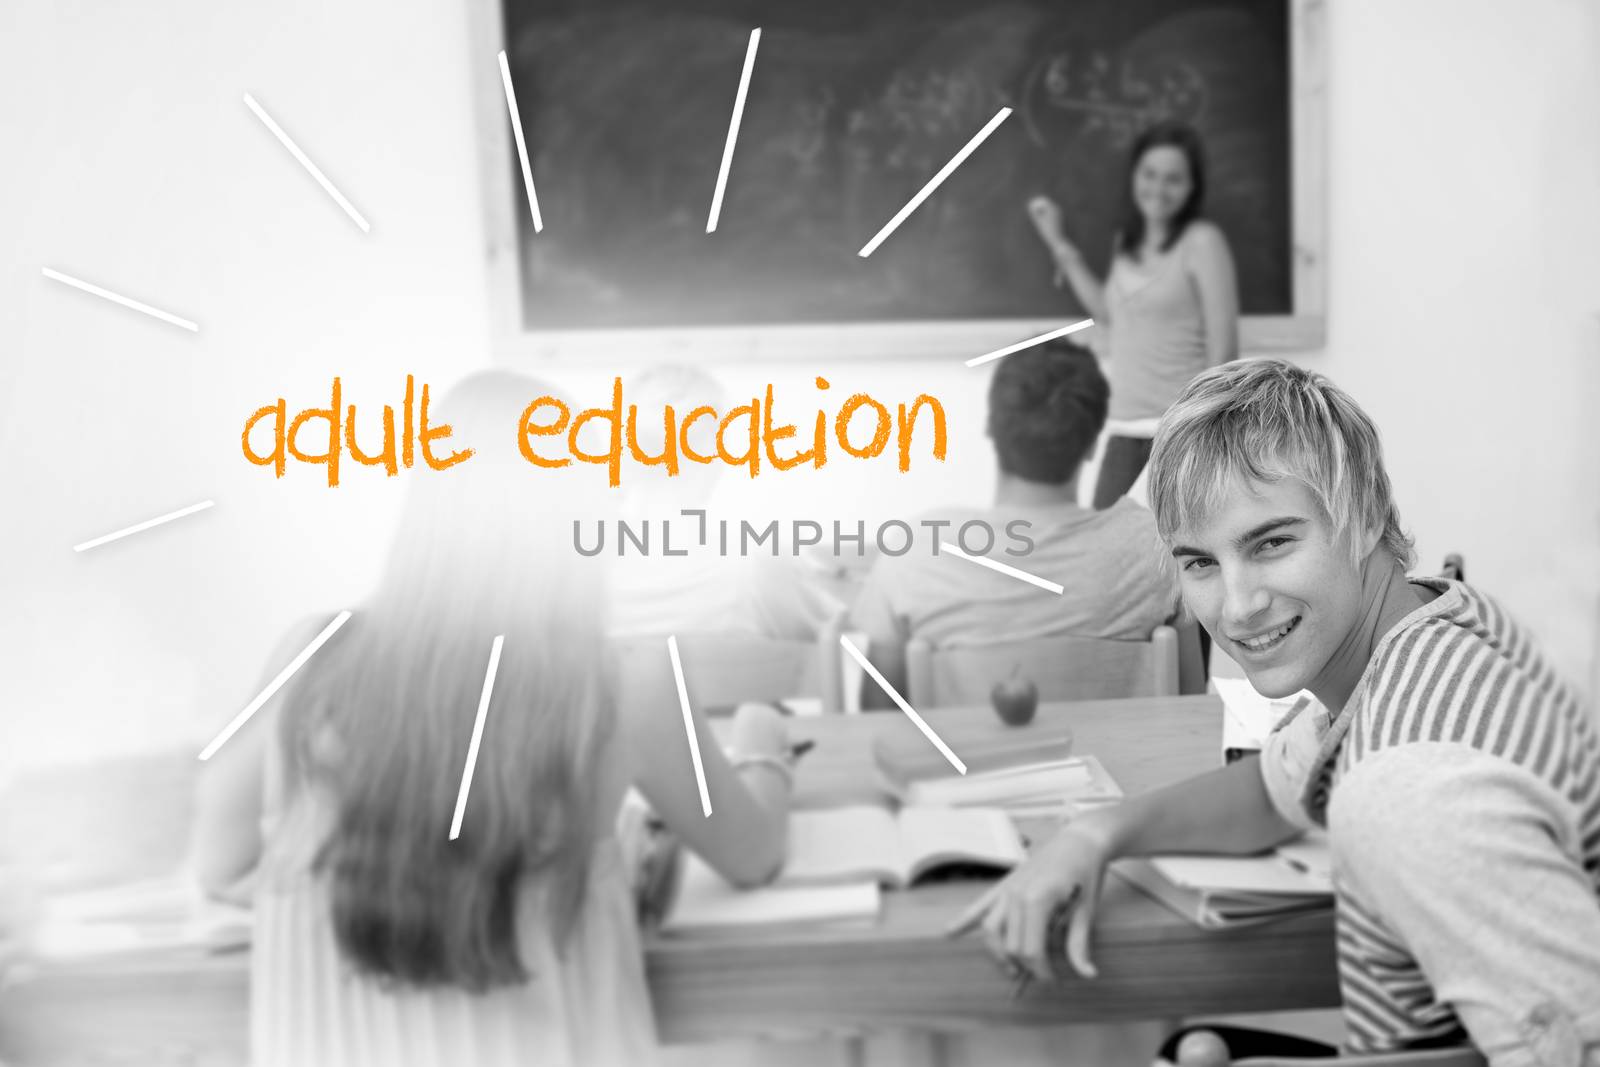 Adult education against students in a classroom by Wavebreakmedia